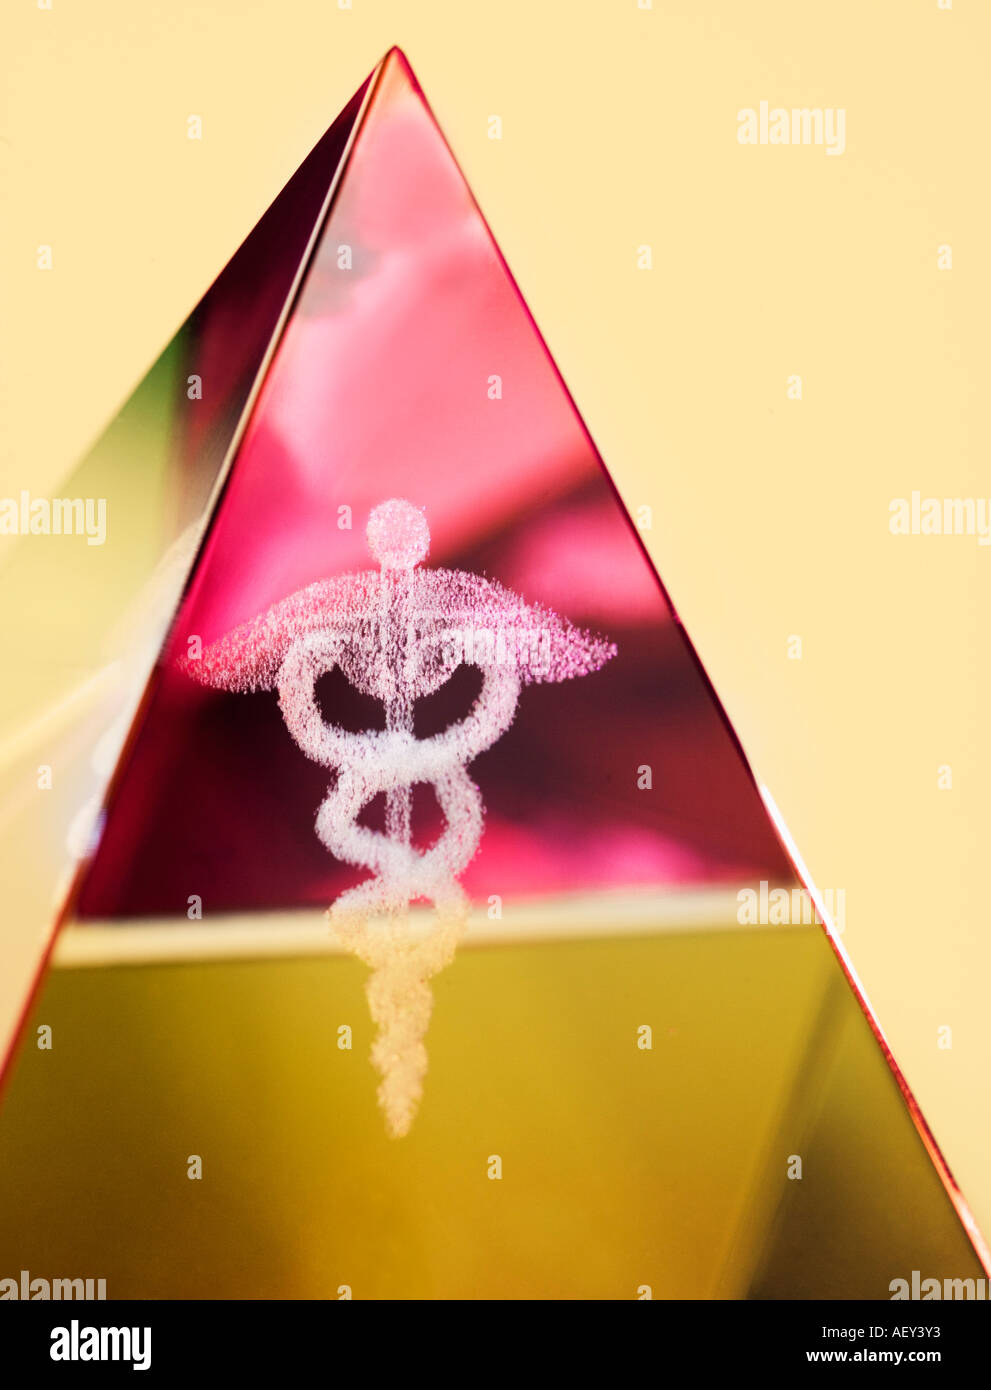 Close up of pyramid with Caduceus symbol in it Stock Photo